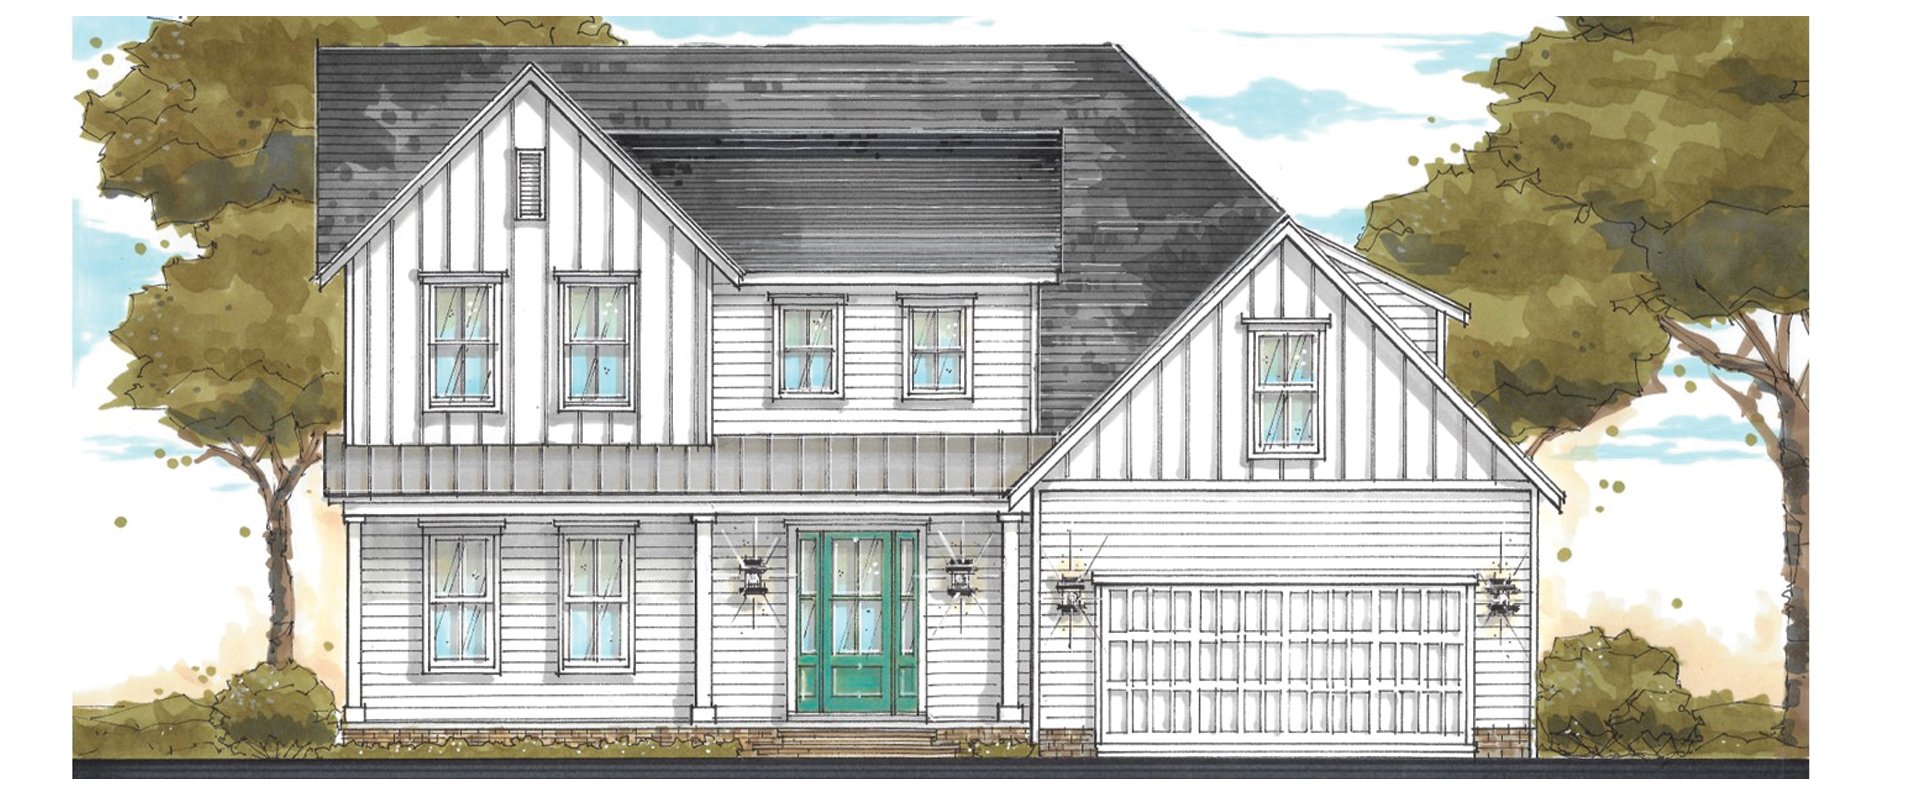 Lafaye Custom Homes' Chattooga model features 5 BR, 4 BA and 2,815 finished sf